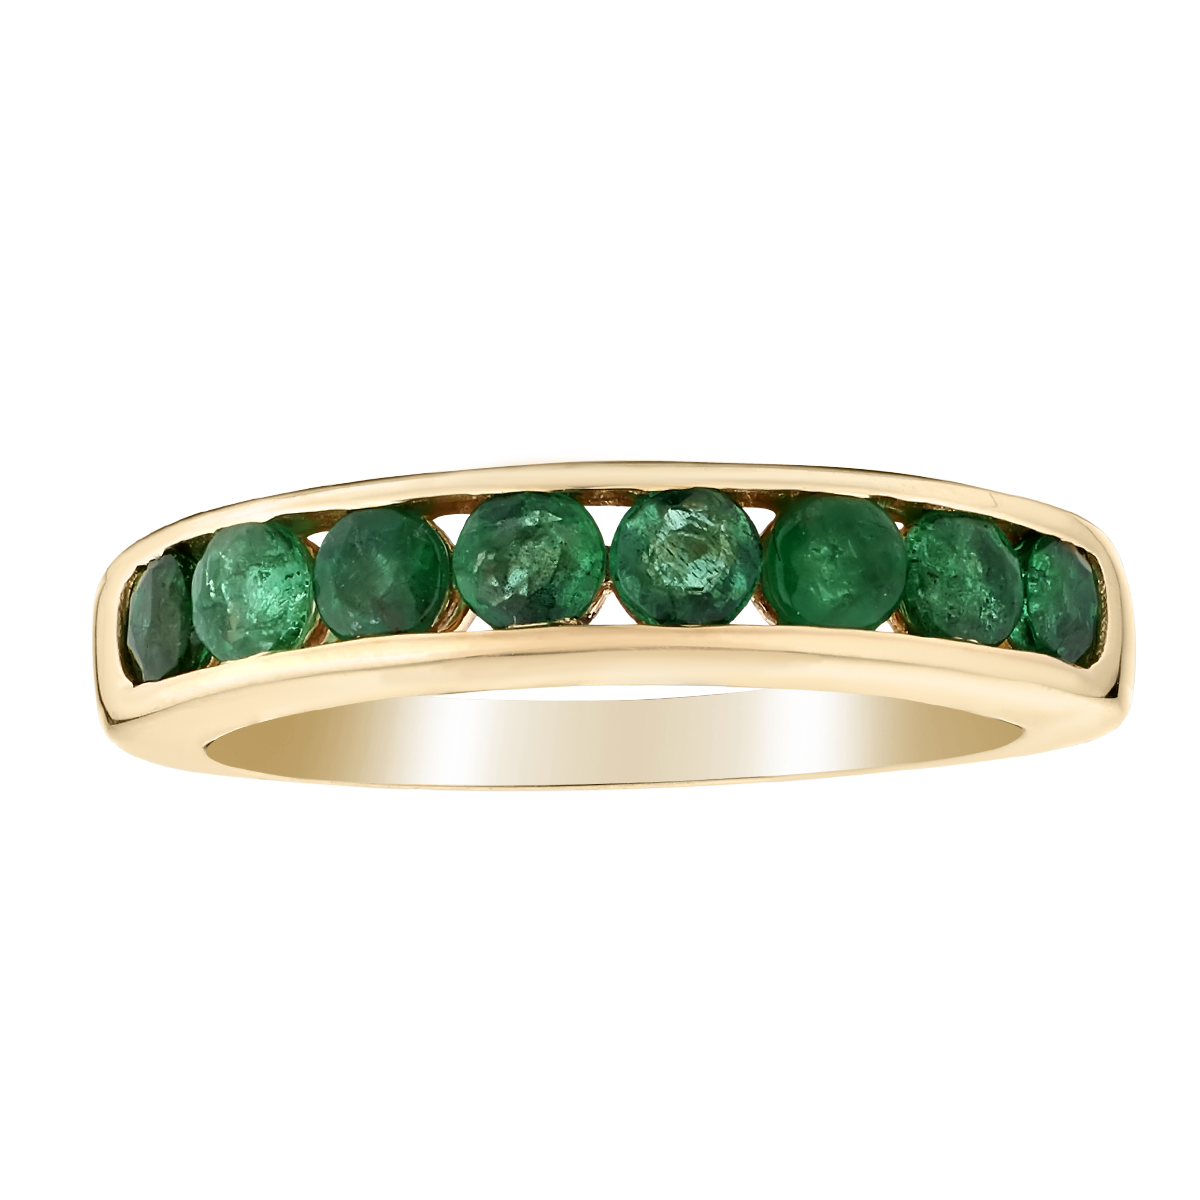 1.00 Carat Genuine Emerald Band Ring,  14kt Yellow Gold. Gemstone Rings. Griffin Jewellery Designs